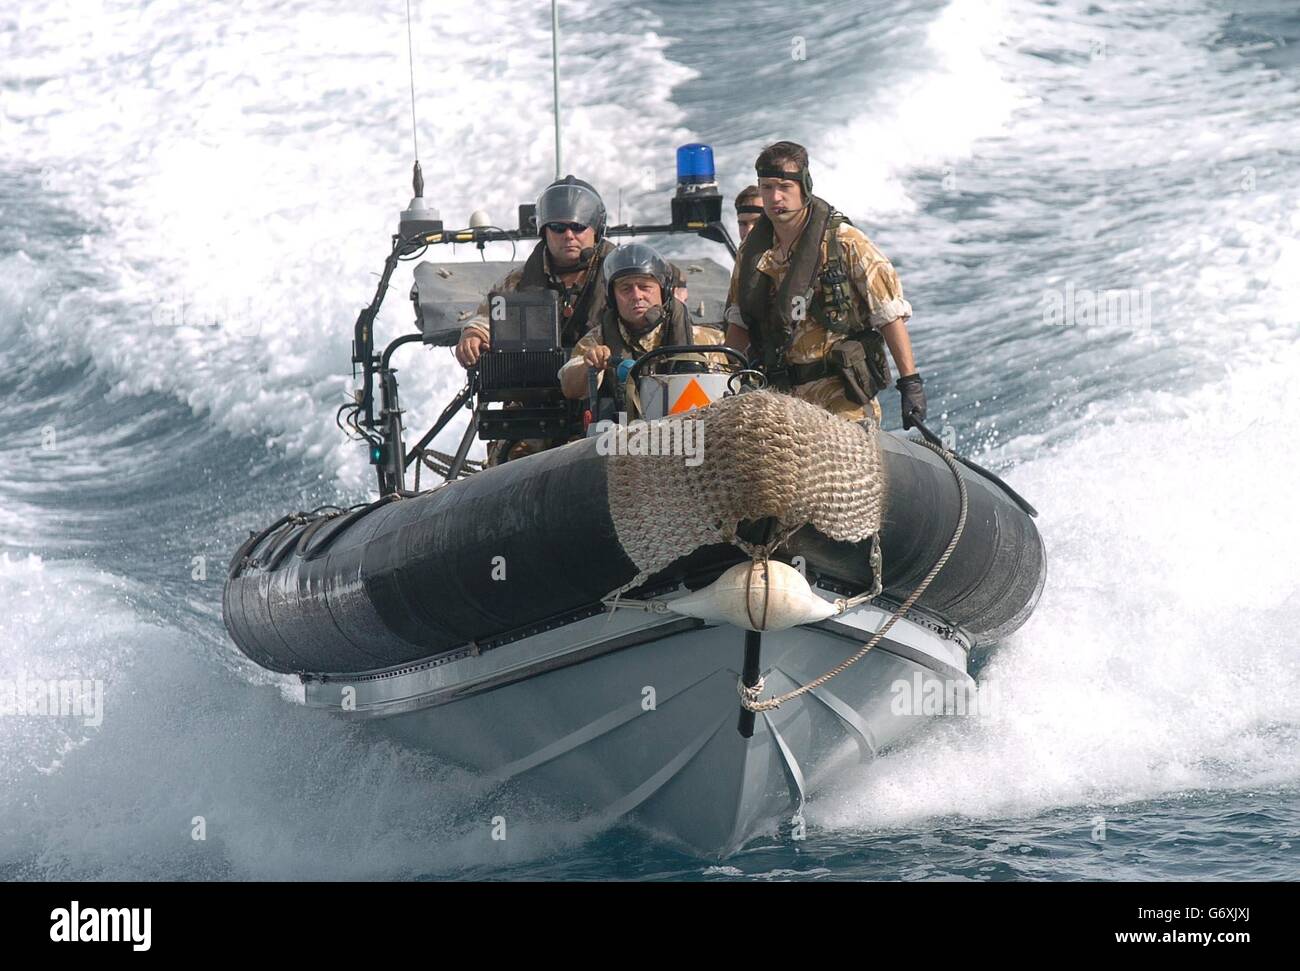 A team of Royal Marines led by 2 Lt Doug Pennefather, 26, (right) attached to HMS Grafton, A Type 23 Frigate currently patrolling the waters off the coast of Iraq. Terrorist activities off the coast of Iraq will not be curbed unless the coalition co-operates more closely with Iran, according to the captain of the British warship patrolling the region. Commander Adrian Cassar said the occupying forces had been making good progress regulating shipping in Iraqi territory, but had little information concerning movements in neighbouring Iranian waters. Stock Photo